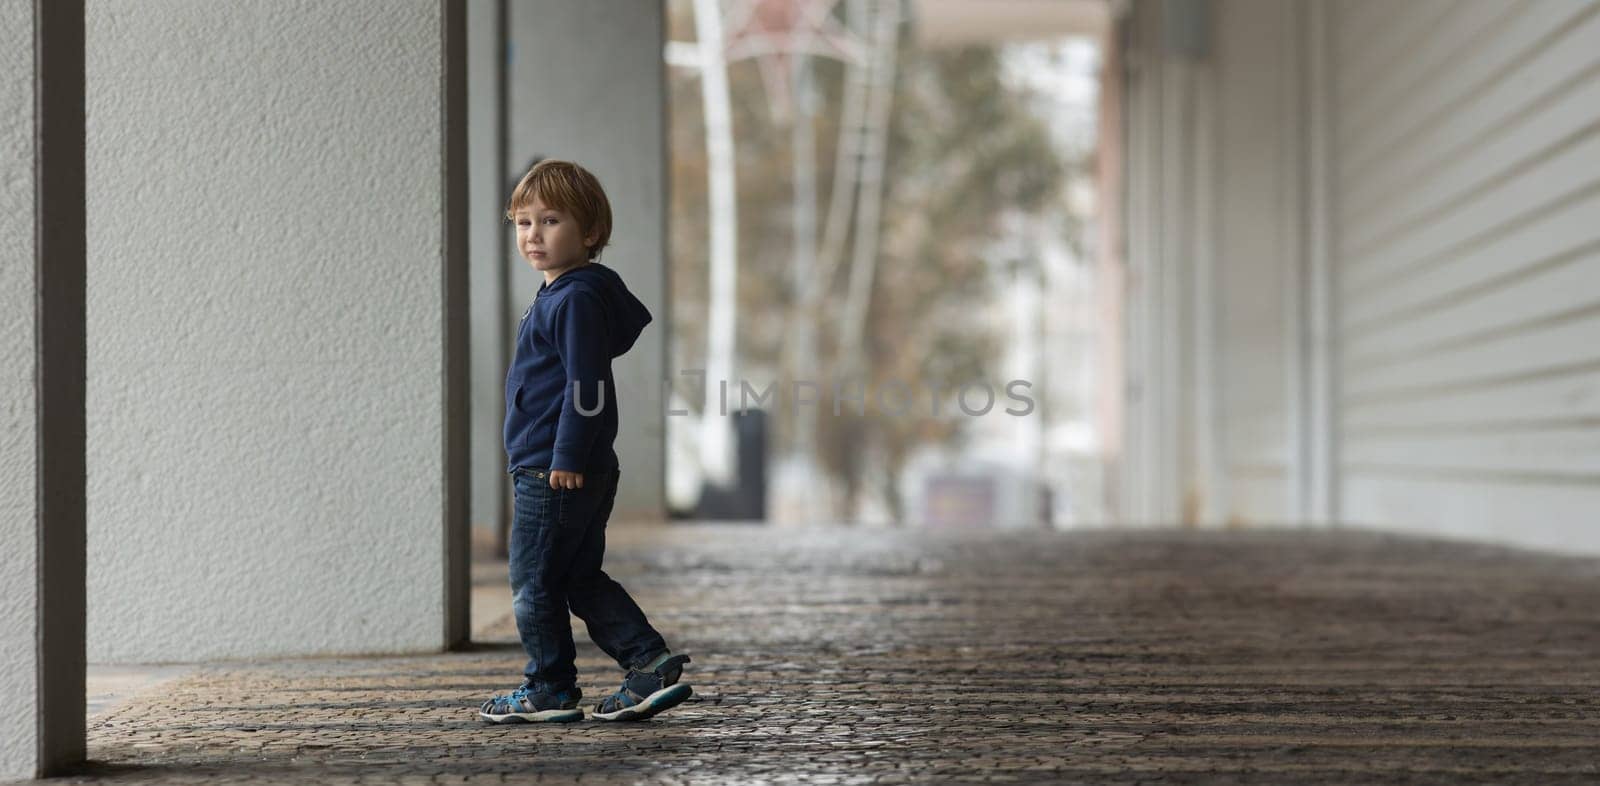 A young boy walking down a sidewalk next to a building - telephoto